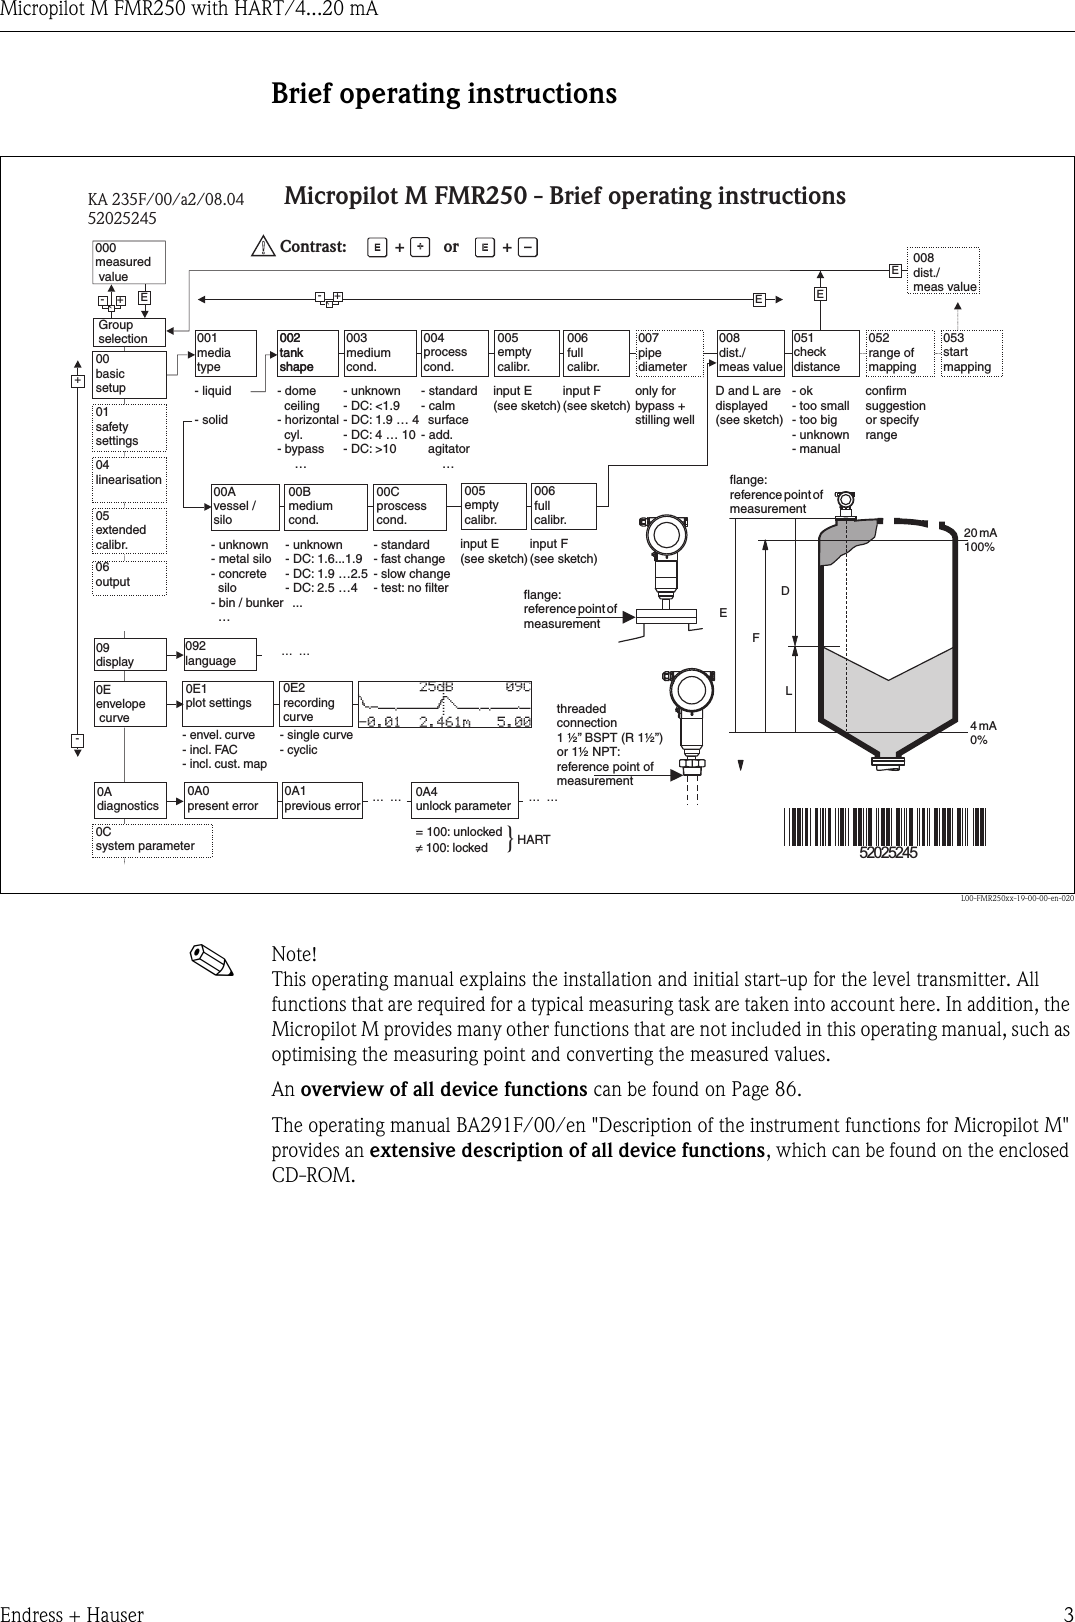 Micropilot M FMR250 with HART/4...20 mAEndress + Hauser 3Brief operating instructionsL00-FMR250xx-19-00-00-en-020!Note! This operating manual explains the installation and initial start-up for the level transmitter. All functions that are required for a typical measuring task are taken into account here. In addition, the Micropilot M provides many other functions that are not included in this operating manual, such as optimising the measuring point and converting the measured values.An overview of all device functions can be found on Page 86.The operating manual BA291F/00/en &quot;Description of the instrument functions for Micropilot M&quot; provides an extensive description of all device functions, which can be found on the enclosed CD-ROM.E+-+E+-EE-…  ……  …KA 235F/00/a2/08.0452025245…  …20 mA100%4mA0%DLFE52025245Micropilot M FMR250 - Brief operating instructions- domeceiling- horizontalcyl.- bypass…- unknown- metal silo- concretesilo- bin / bunker…- liquid- solid- unknown- DC: &lt;1.9- DC: 1.9 … 4- DC: 4 … 10- DC: &gt;10- standard- calmsurface- add.agitator…input E(see sketch)input E(see sketch)input F(see sketch)input F(see sketch)only forbypass +stilling well- ok- too small- too big- unknown- manualdisplayed(see sketch)D and L are confirmor specifyrangesuggestion000measuredvalueGroupselection00basicsetup01safetysettings0Csystem parameter09display0Eenvelopecurve04linearisation05extendedcalibr.06output092language0Adiagnostics0A0present error002tankshape002tankshape00Avessel /silo004processcond.005emptycalibr.005emptycalibr.006fullcalibr.006fullcalibr.007pipediameter008dist./meas value051checkdistance003mediumcond.00Bmediumcond.00Cproscesscond.052range ofmapping053startmapping008dist./meas value- envel. curve- incl. FAC- incl. cust. map- single curve- cyclic= 100: unlocked100: locked≠0E1plot settings0E2recordingcurve0A1previous error0A4unlock parameterHART}Contrast: +or +- unknown- DC: 1.6...1.9- DC: 1.9 …2.5- DC: 2.5 …4...- standard- fast change- slow change- test: no filterflange:reference point ofmeasurementflange:reference point ofmeasurementthreadedconnection1 ½” (R 1:reference point ofmeasurementBSPT ½”)or 1½ NPT001mediatype